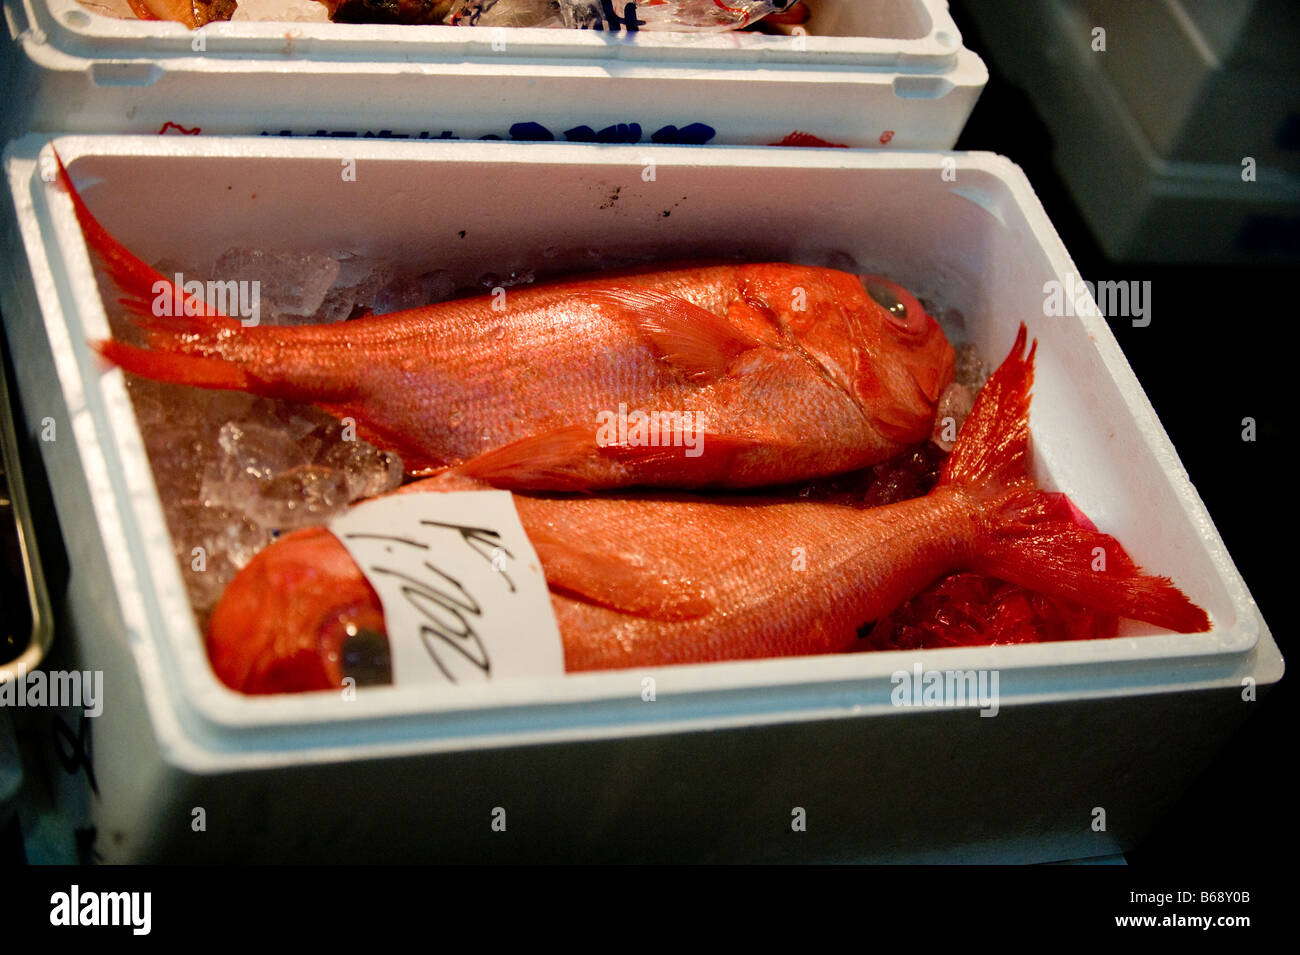 Red snapper fish in an ice box at The Tsukiji Fish Market in Tokyo, Japan  Stock Photo - Alamy